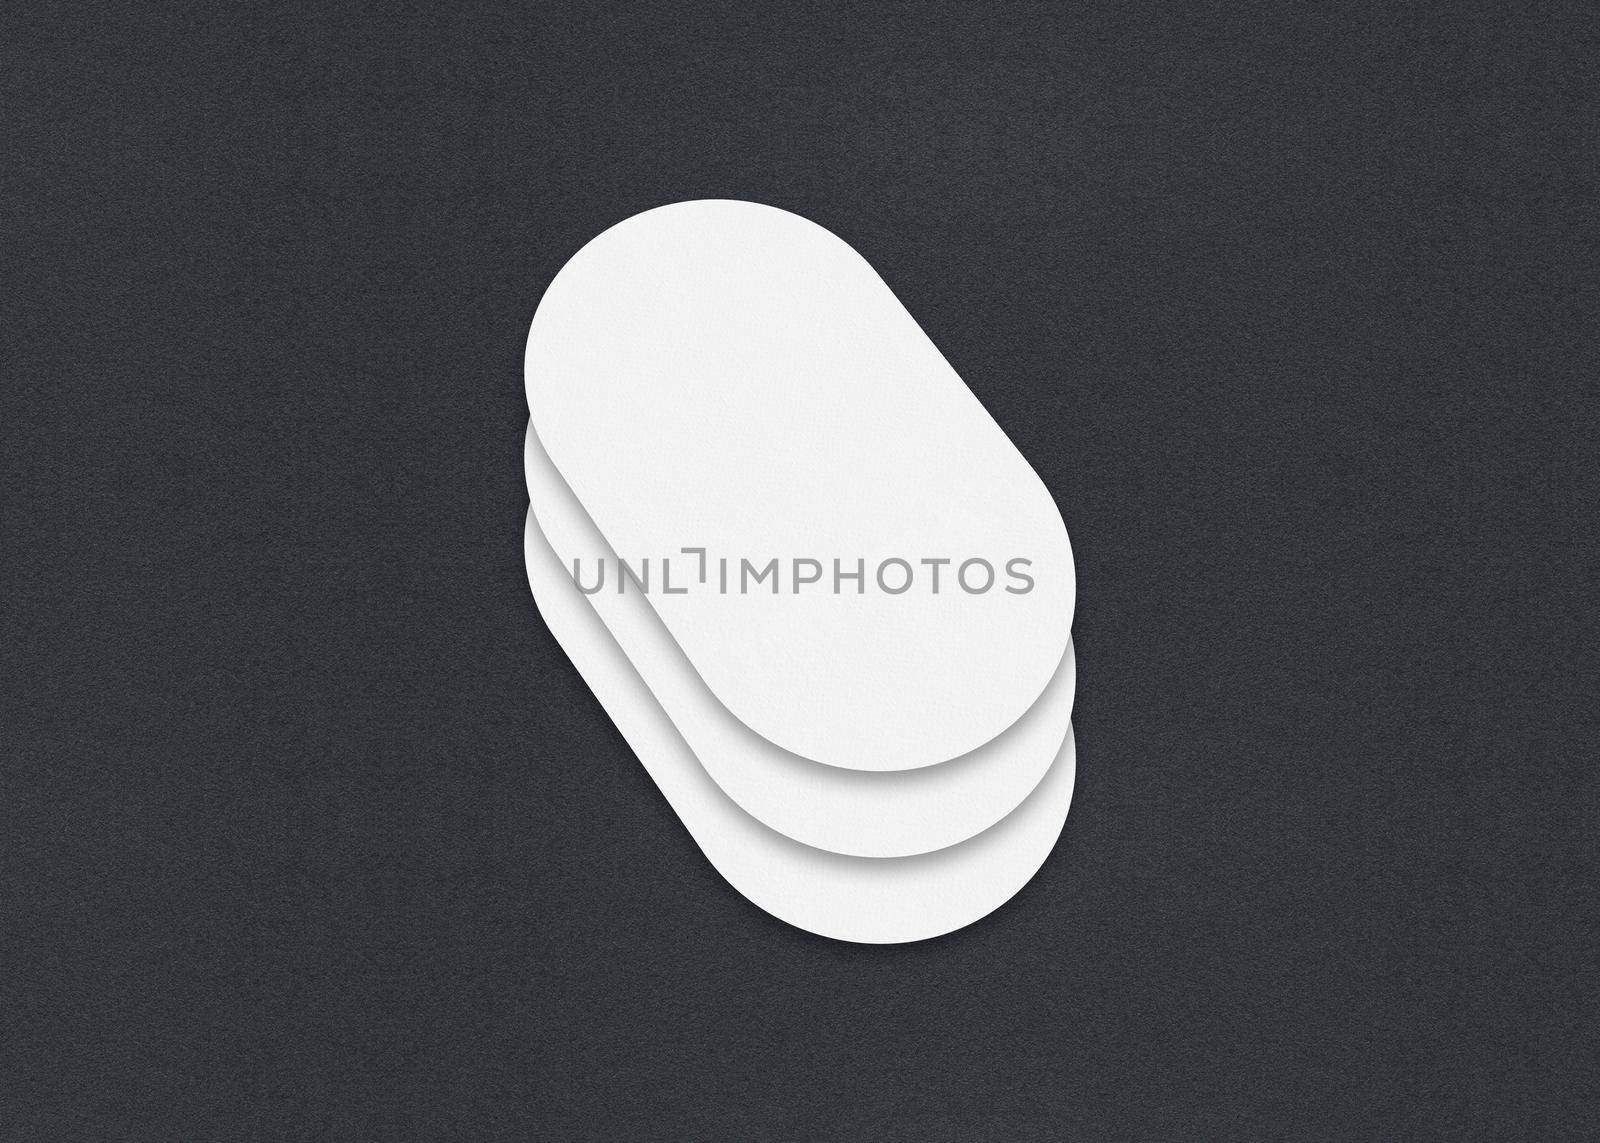 Blank white Business card mockup stacks at grey textured paper background.